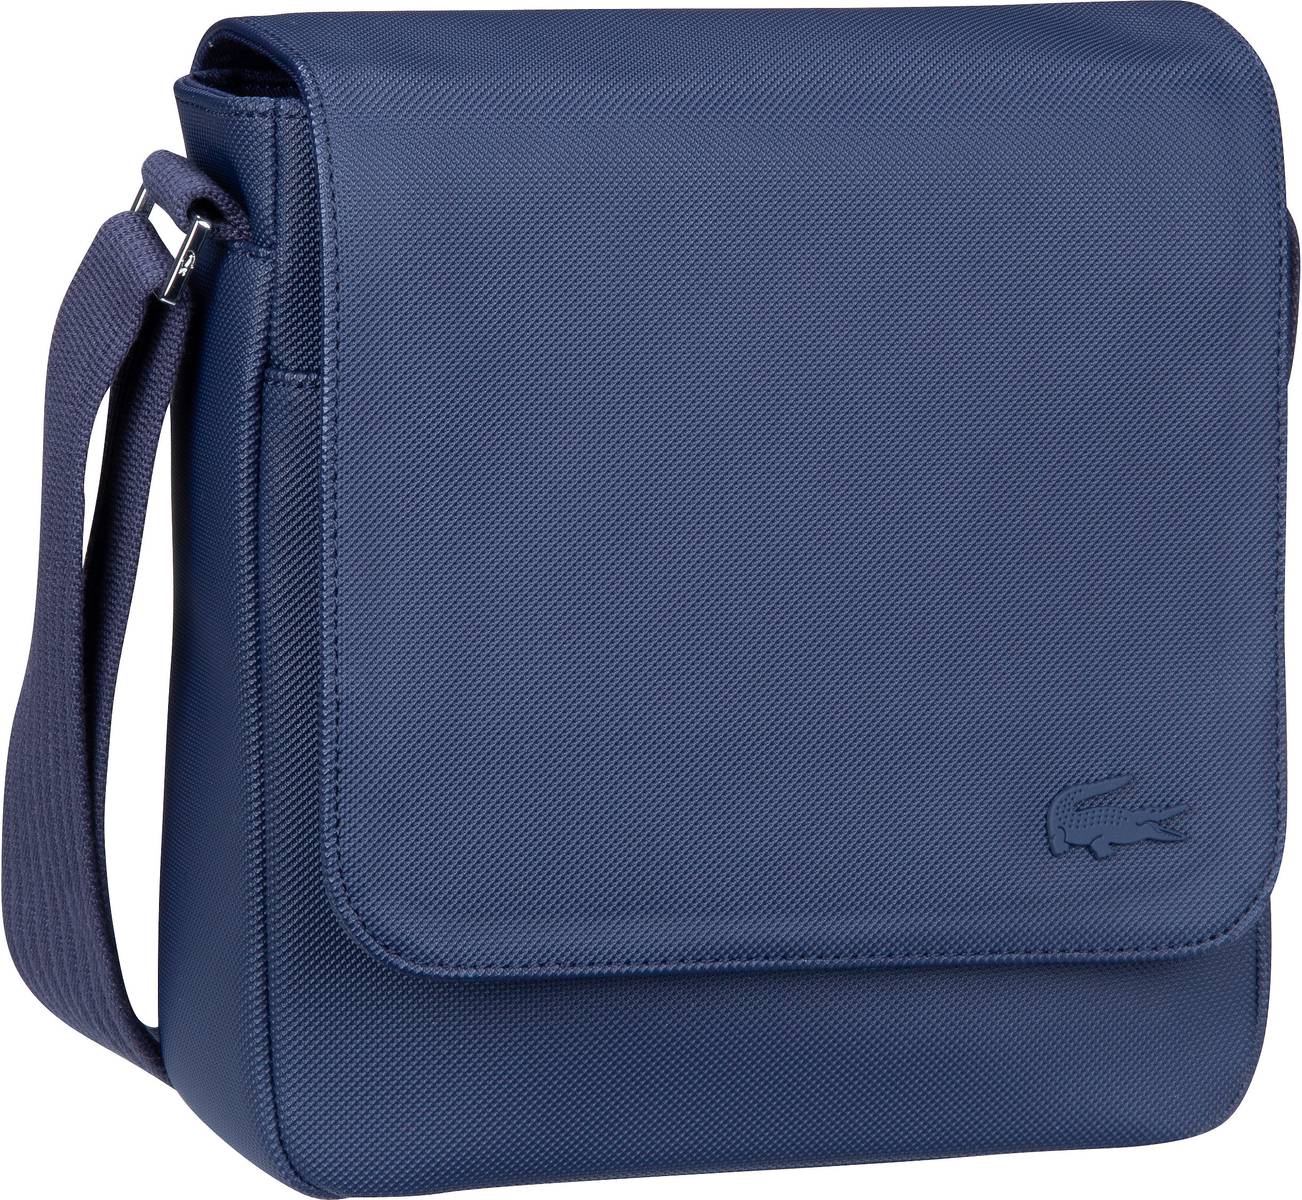 Lacoste Men's Classic Crossover Bag 2341 - Navy